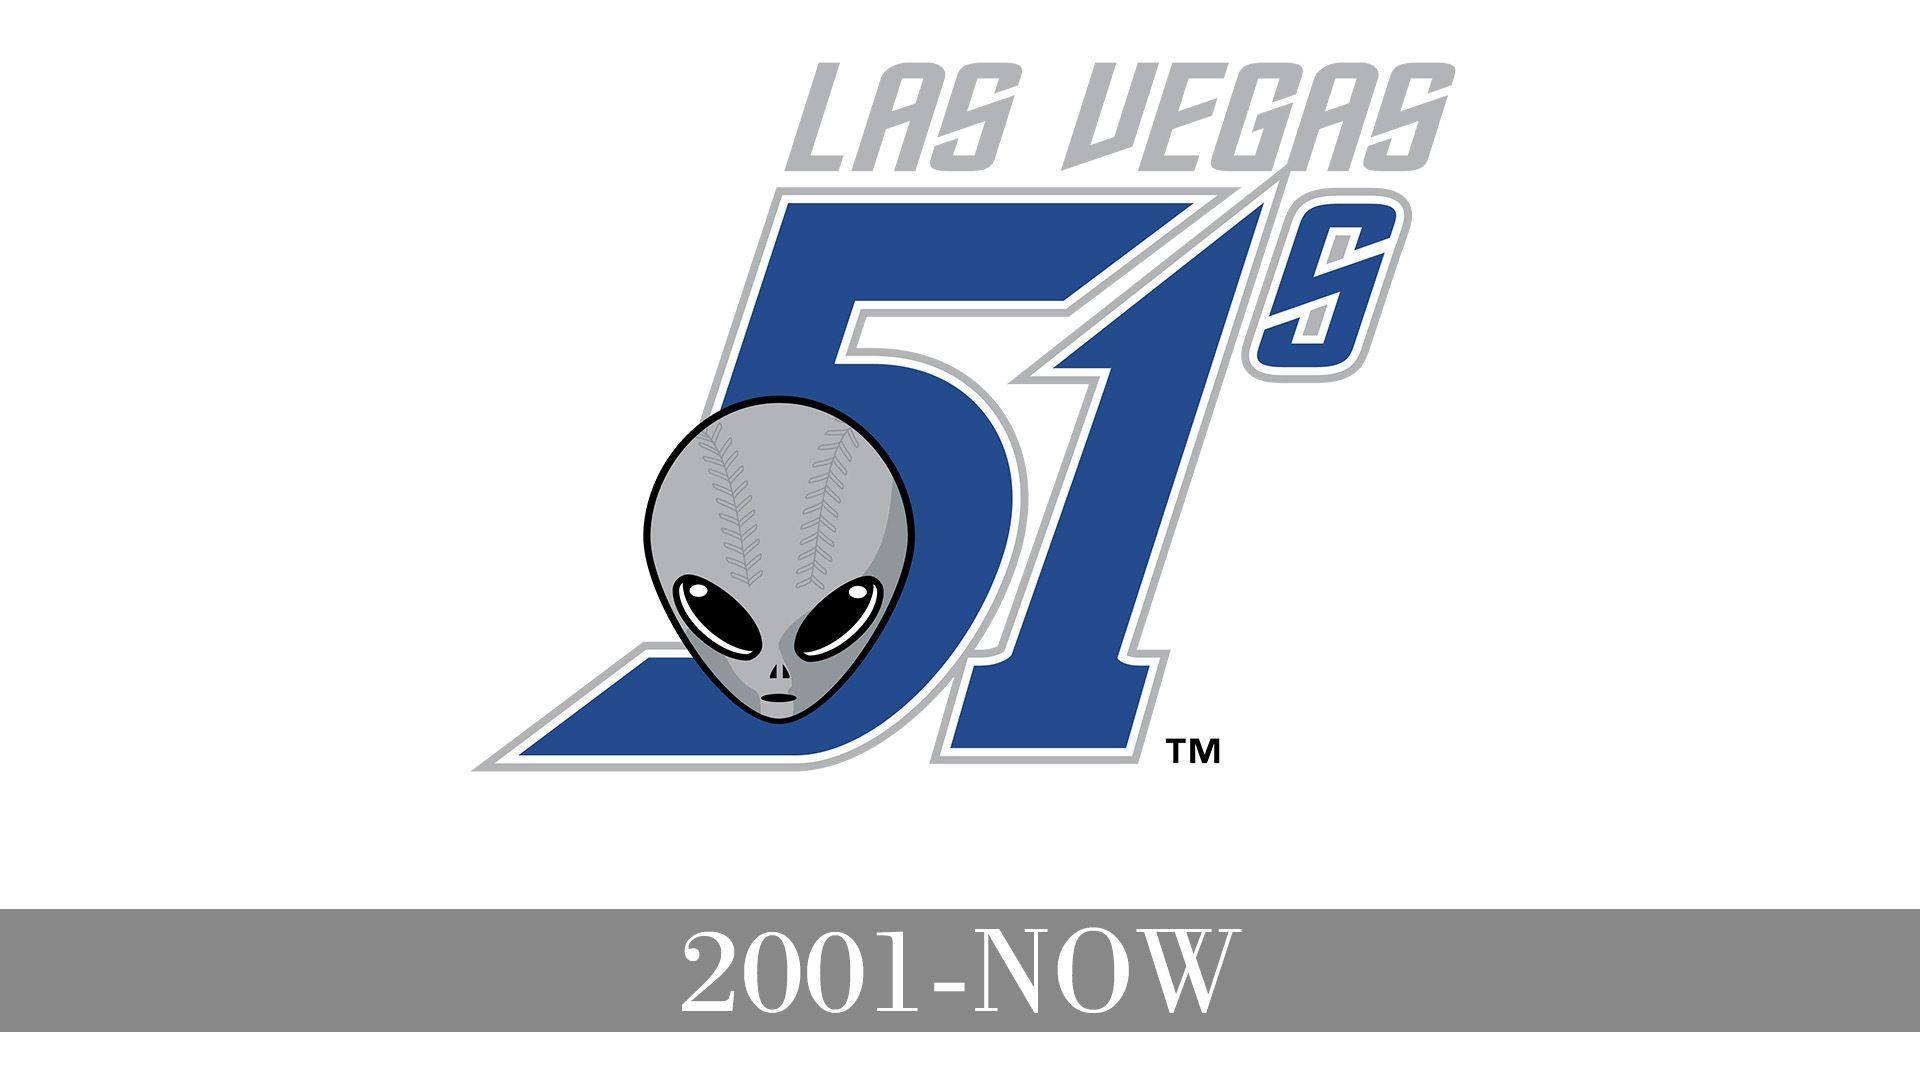 Las Vegas 51s Logo - Las Vegas 51s logo, Las Vegas 51s Symbol, Meaning, History and Evolution